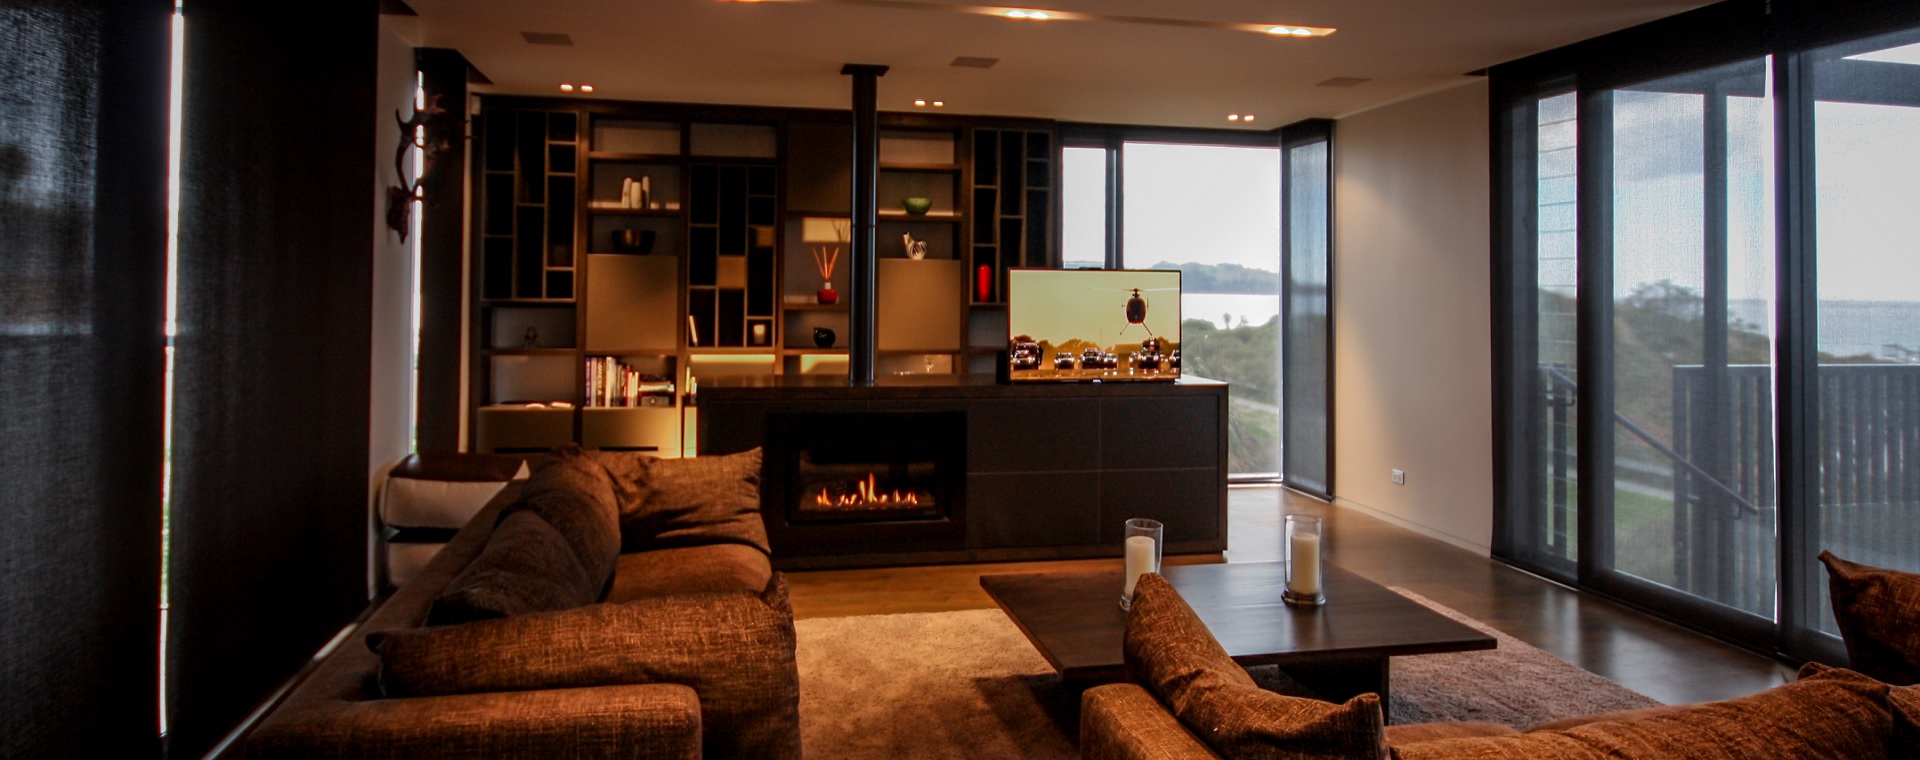 Cozy lounge with seaviews, a fireplace and TV featuring lighting and entertainment control via home automation